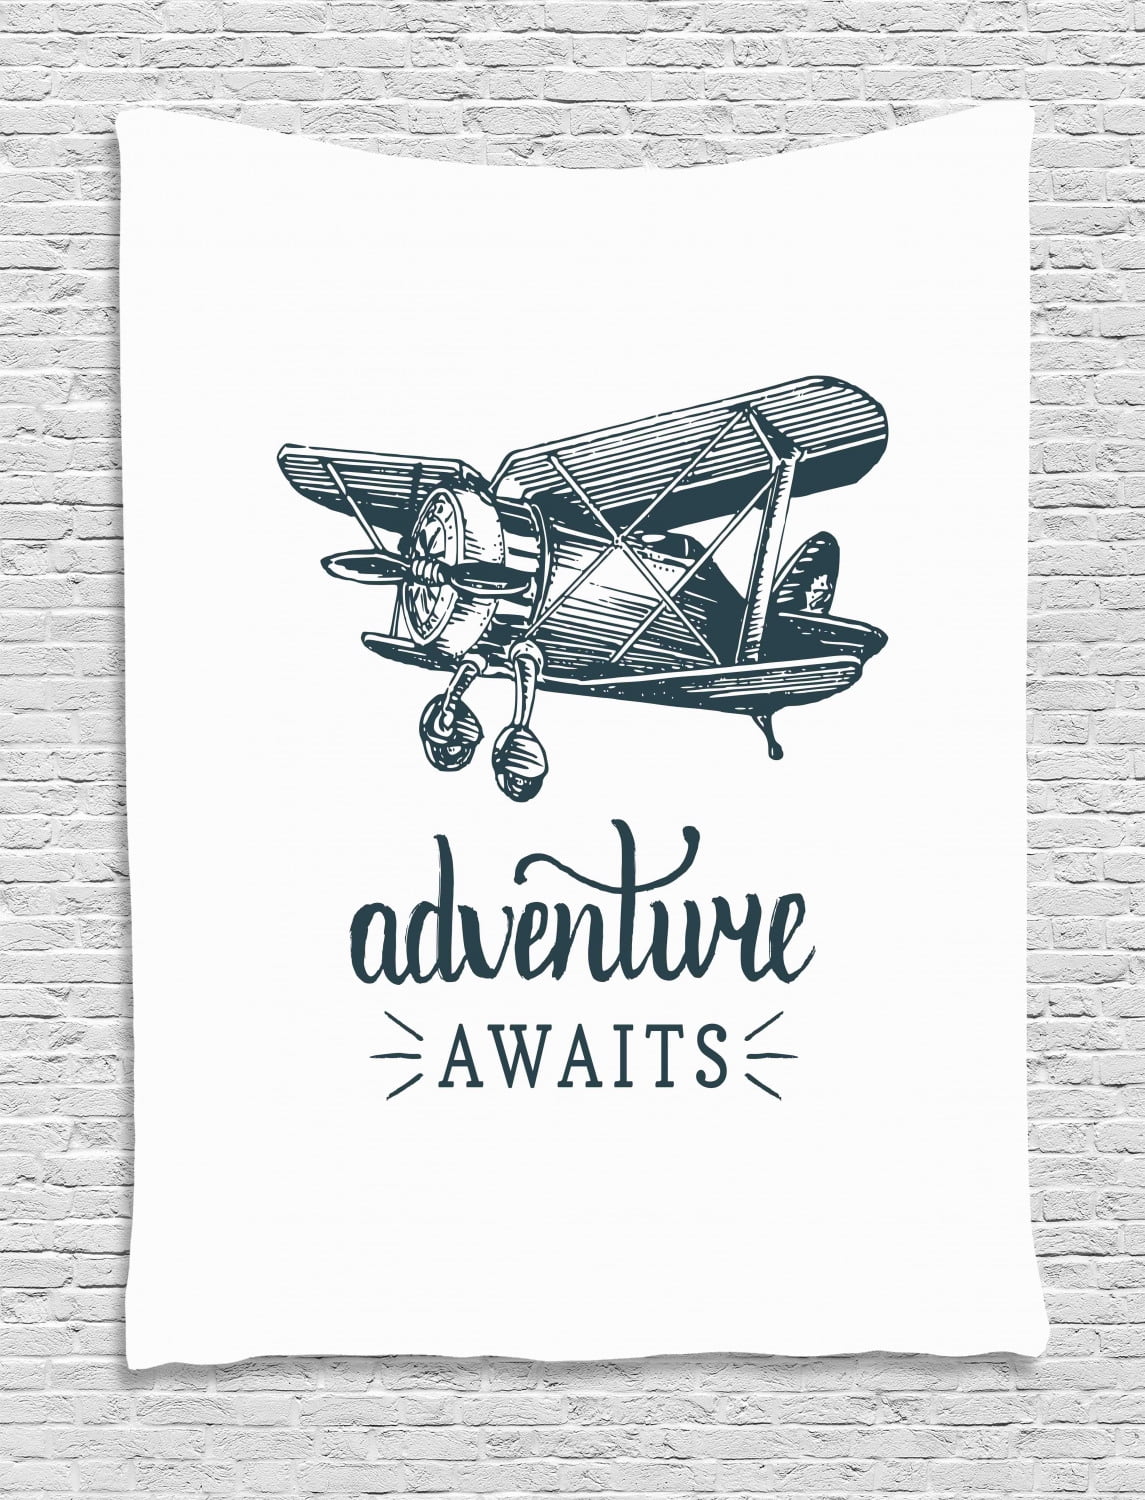 Sign for Nursery Baby Shower or Party Wooden Adventure Awaits Plane Themed Rustic Adventure Baby Ideas Shelf or Table Decor